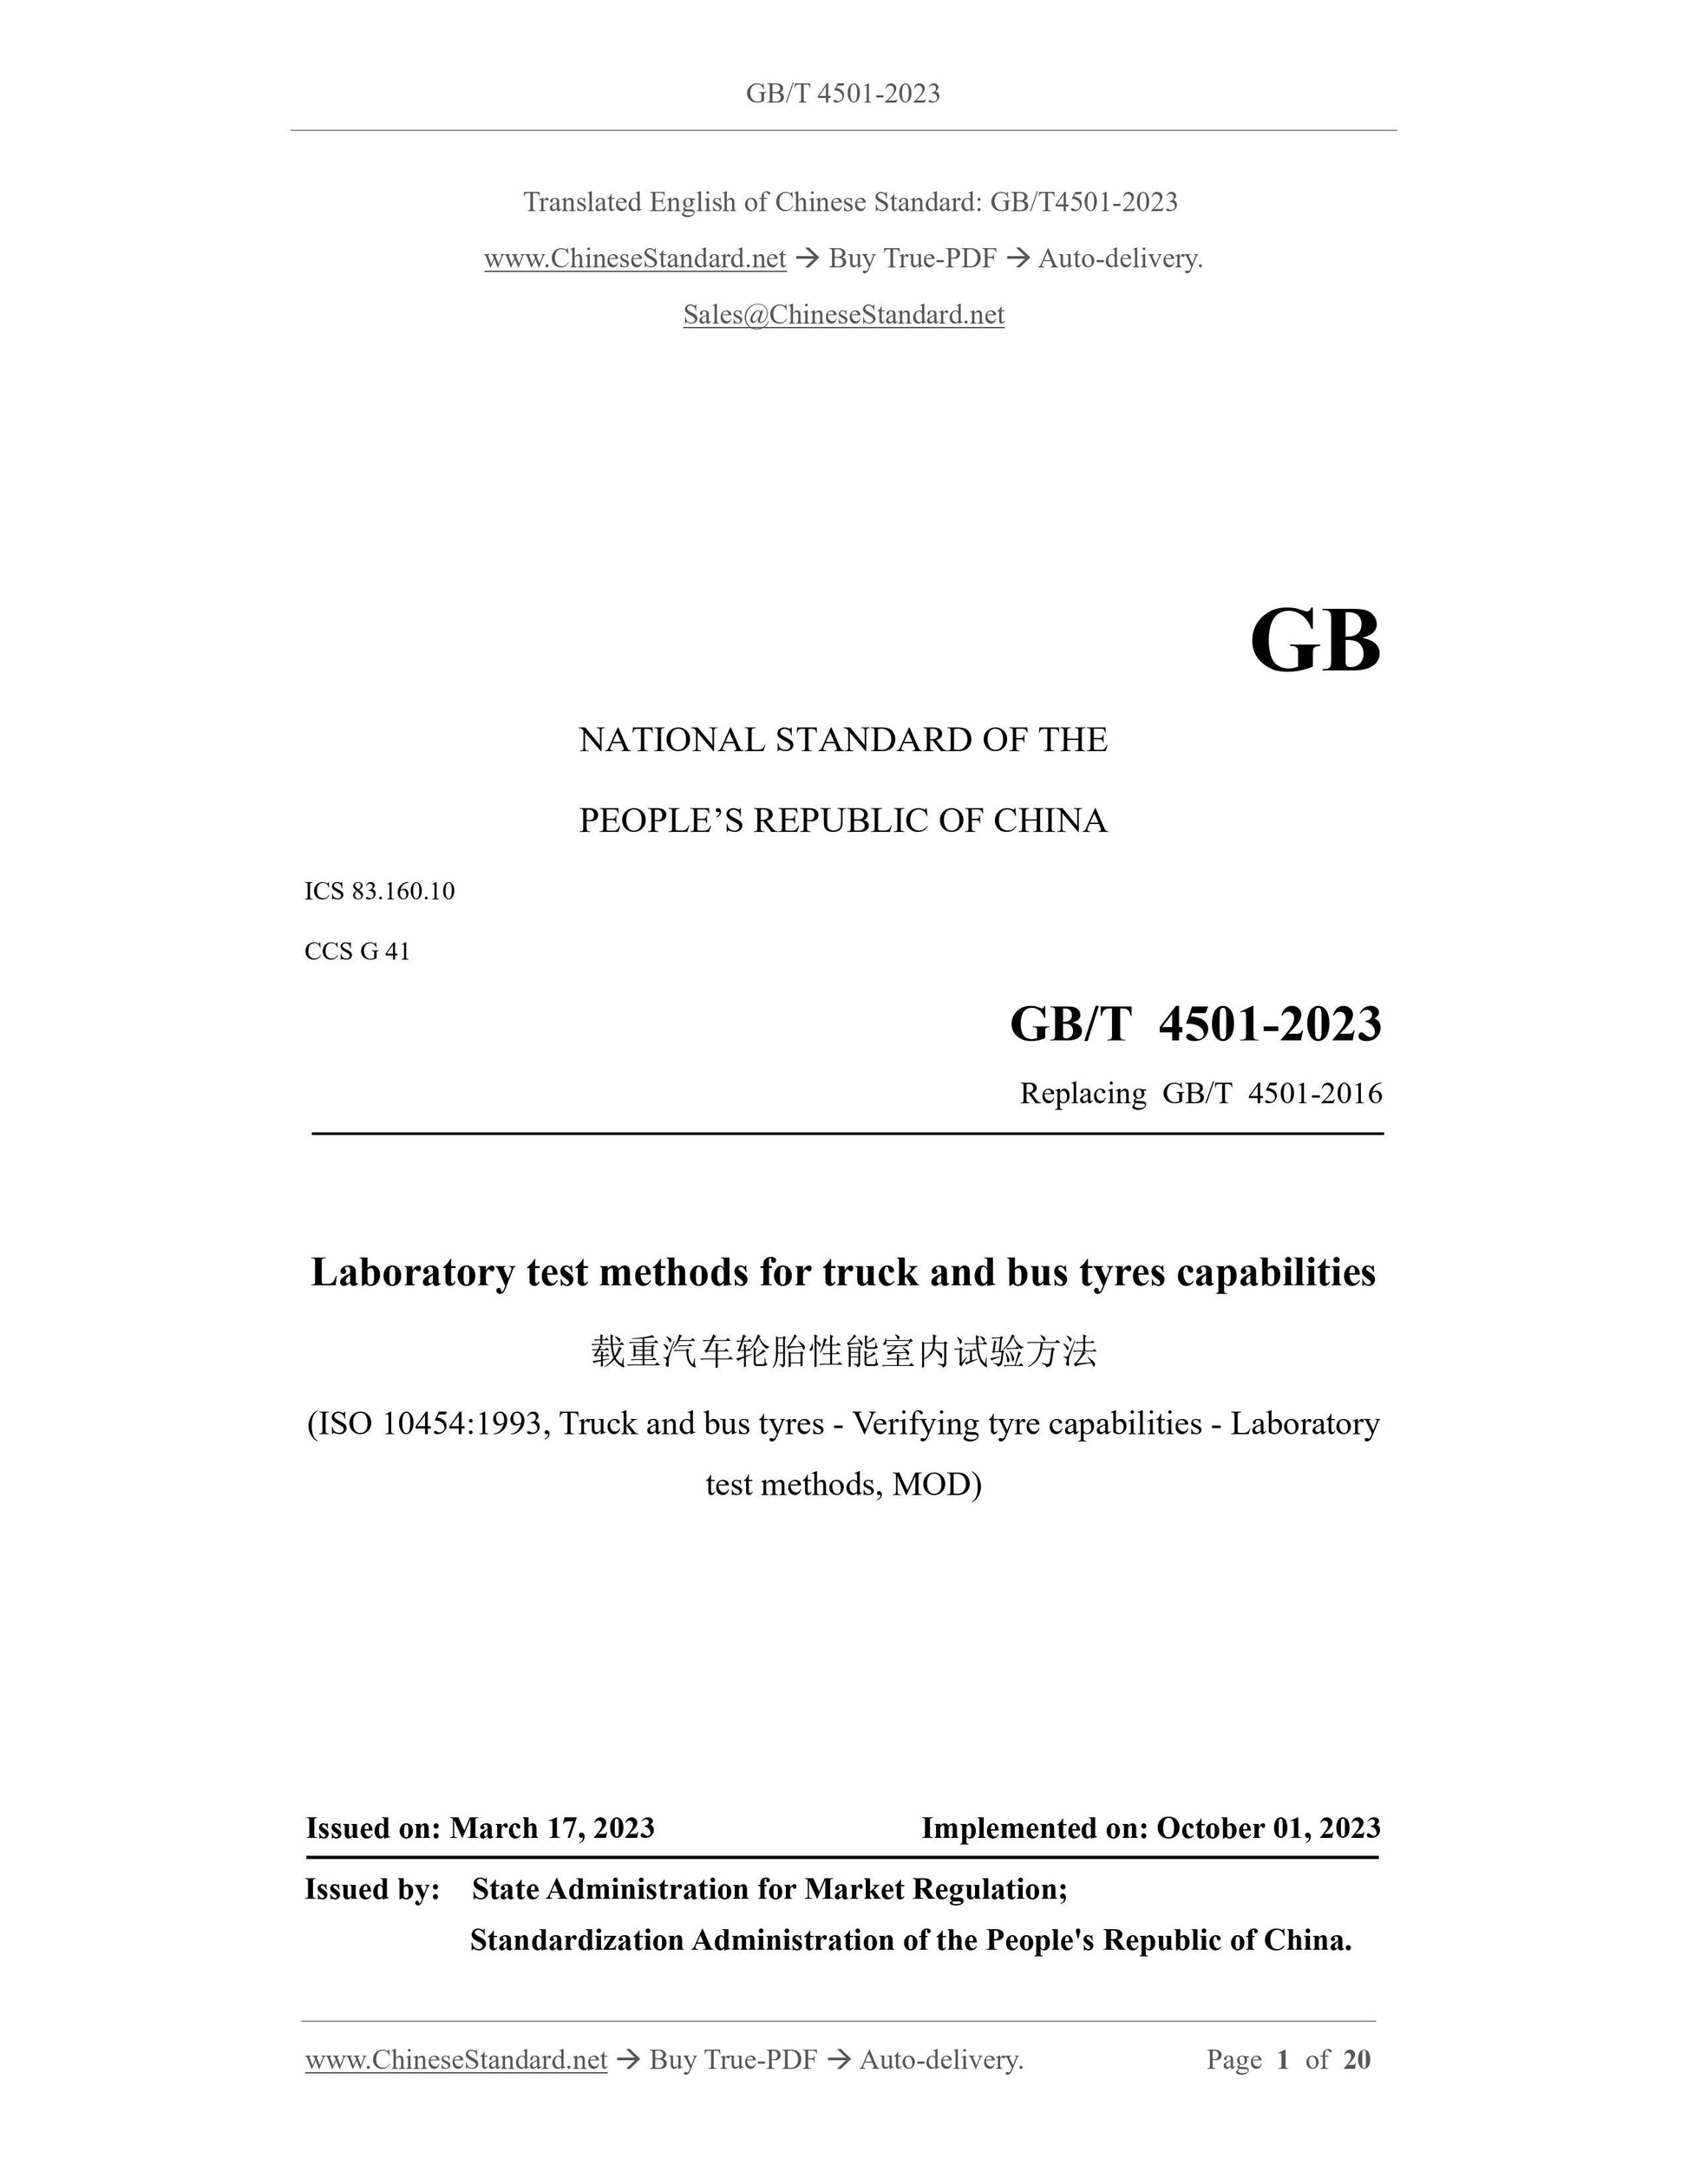 GB/T 4501-2023 Page 1